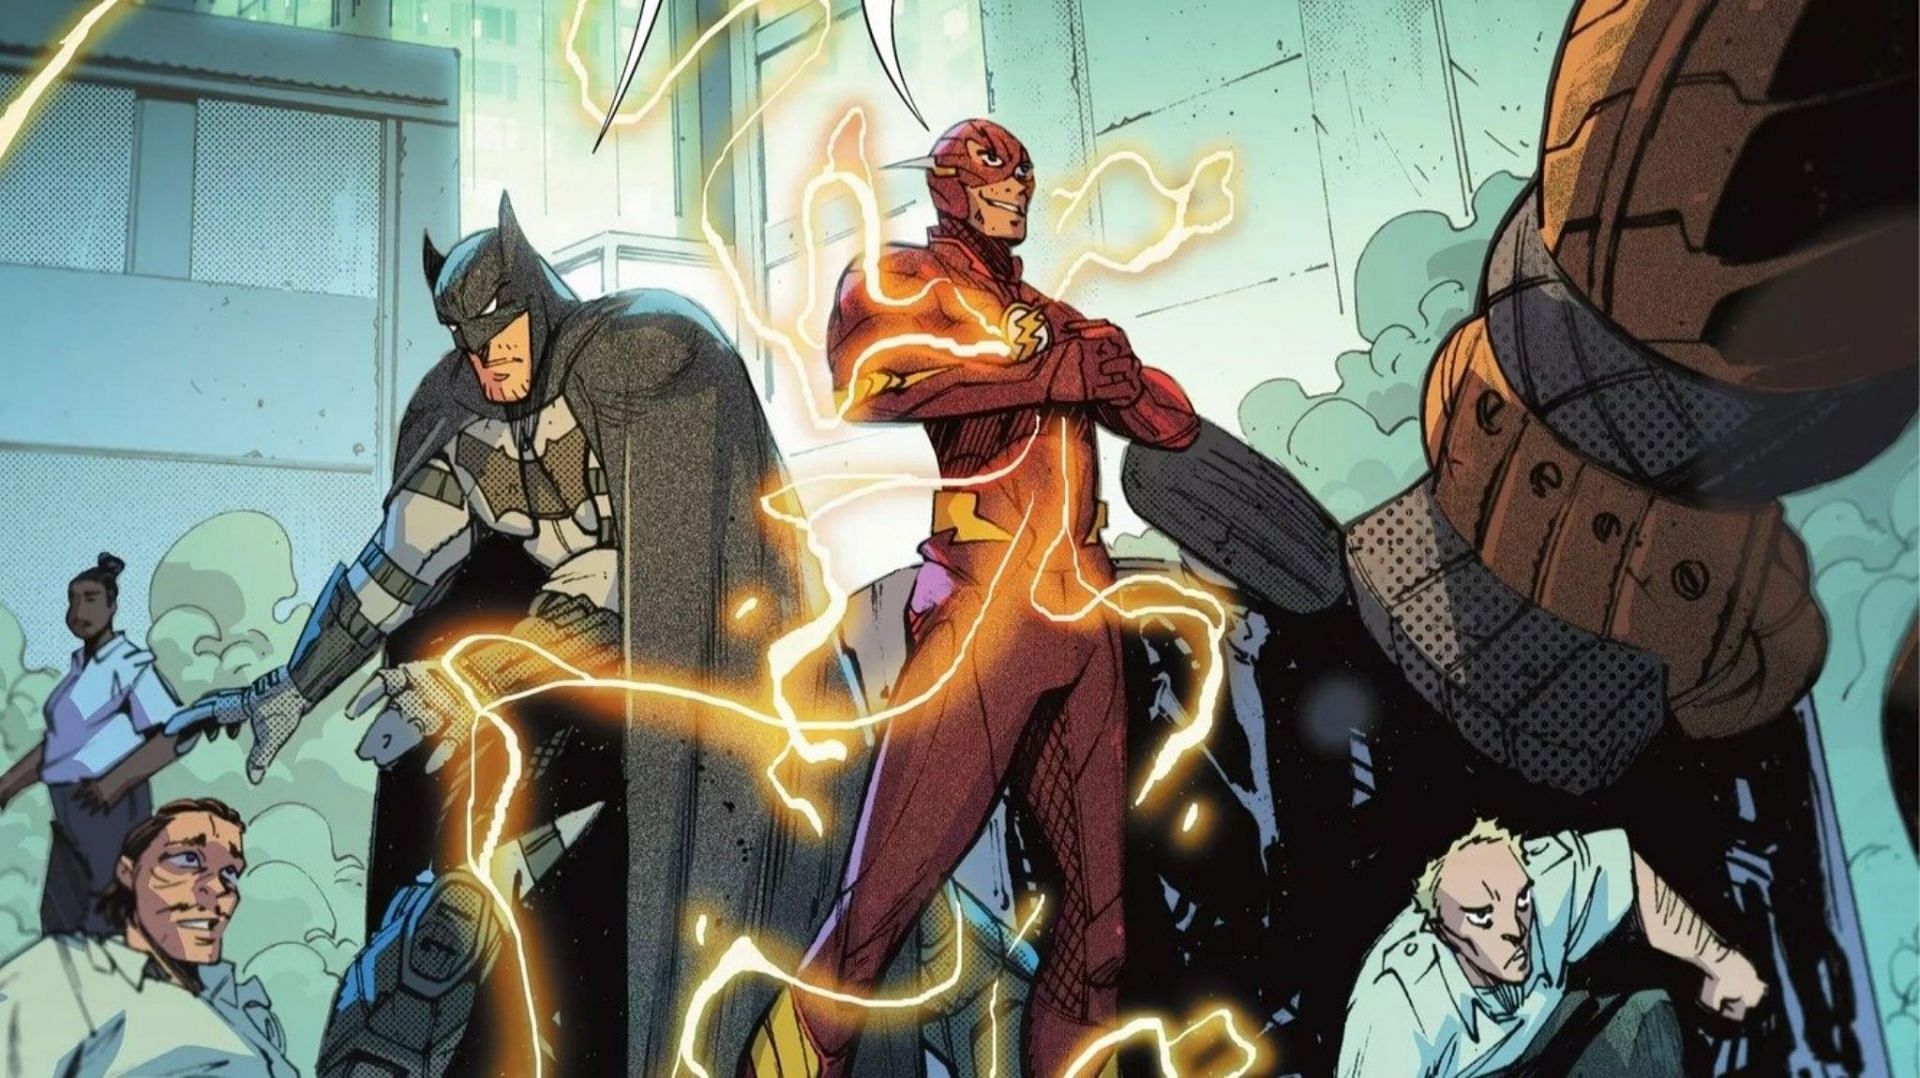 How does the Flash get his new suit in the DCEU? Exploring details amidst  release of the movie tie-in comic